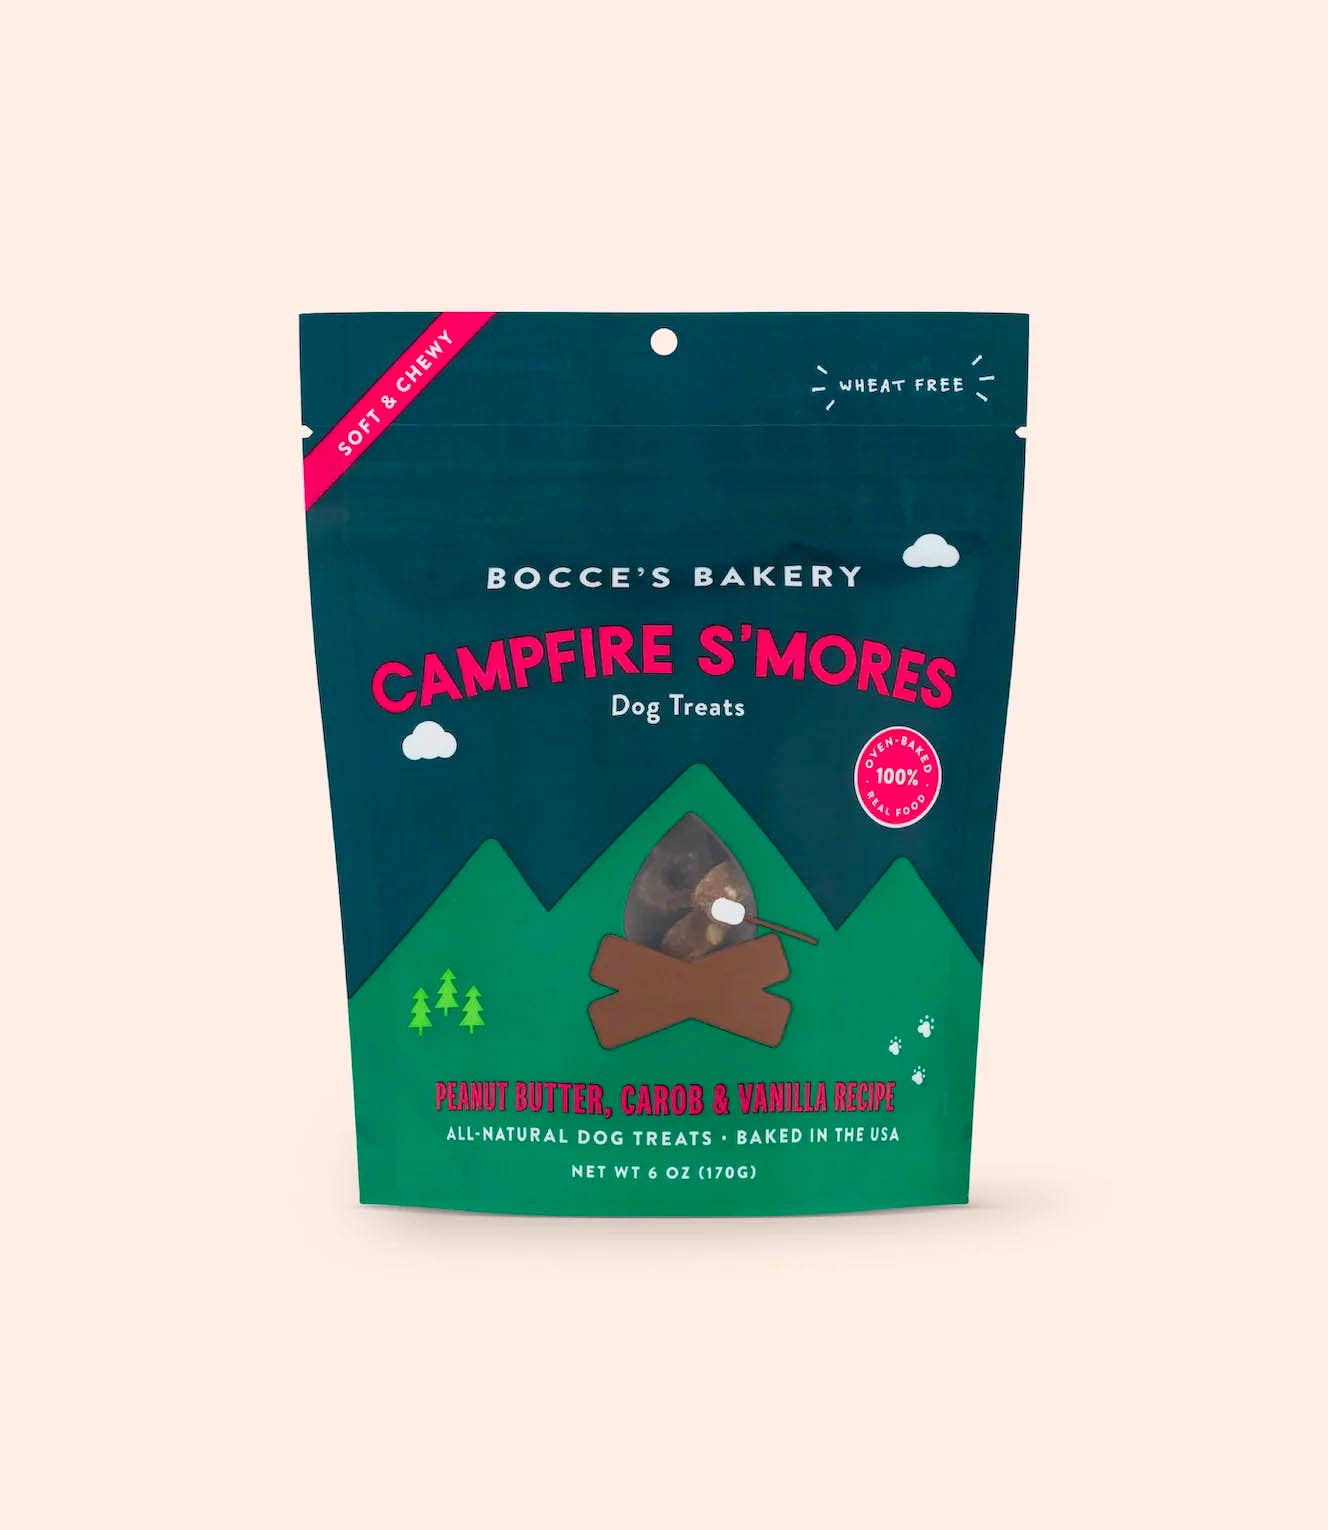 Campfire S'mores 6oz Soft & Chewy Dog Treats